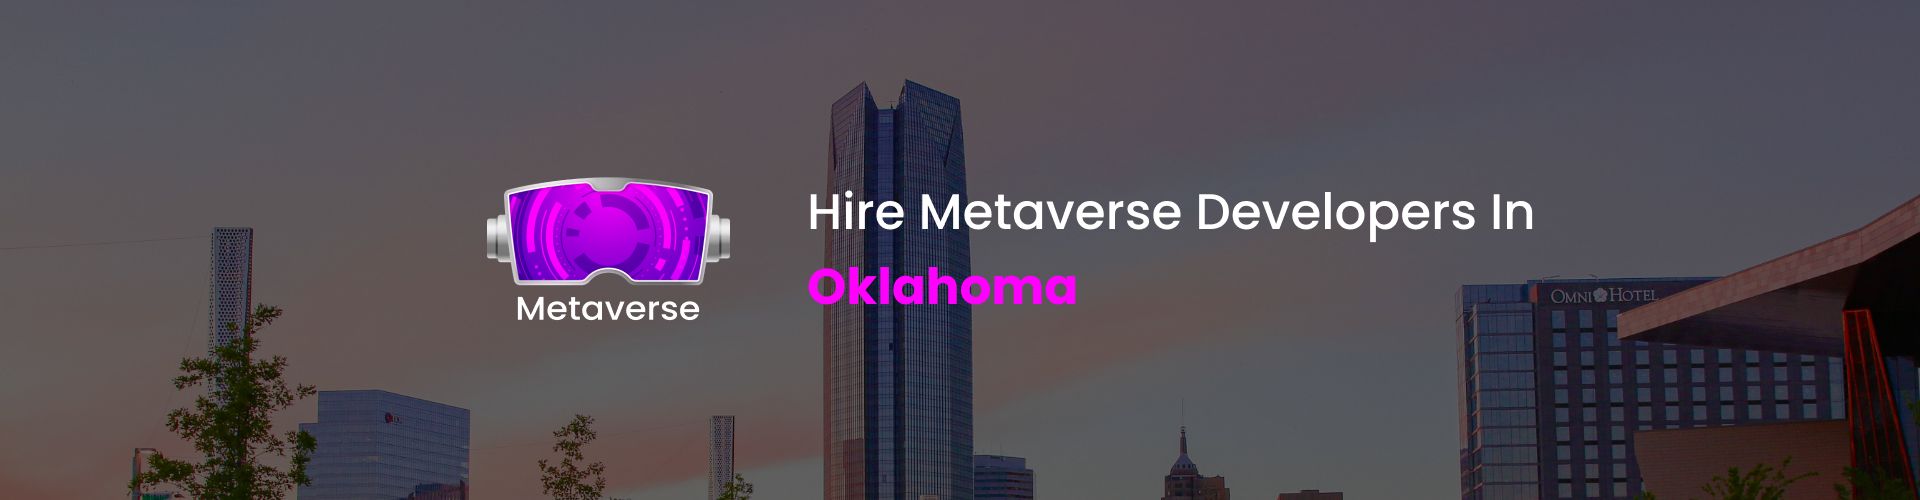 hire metaverse developers in oklahoma